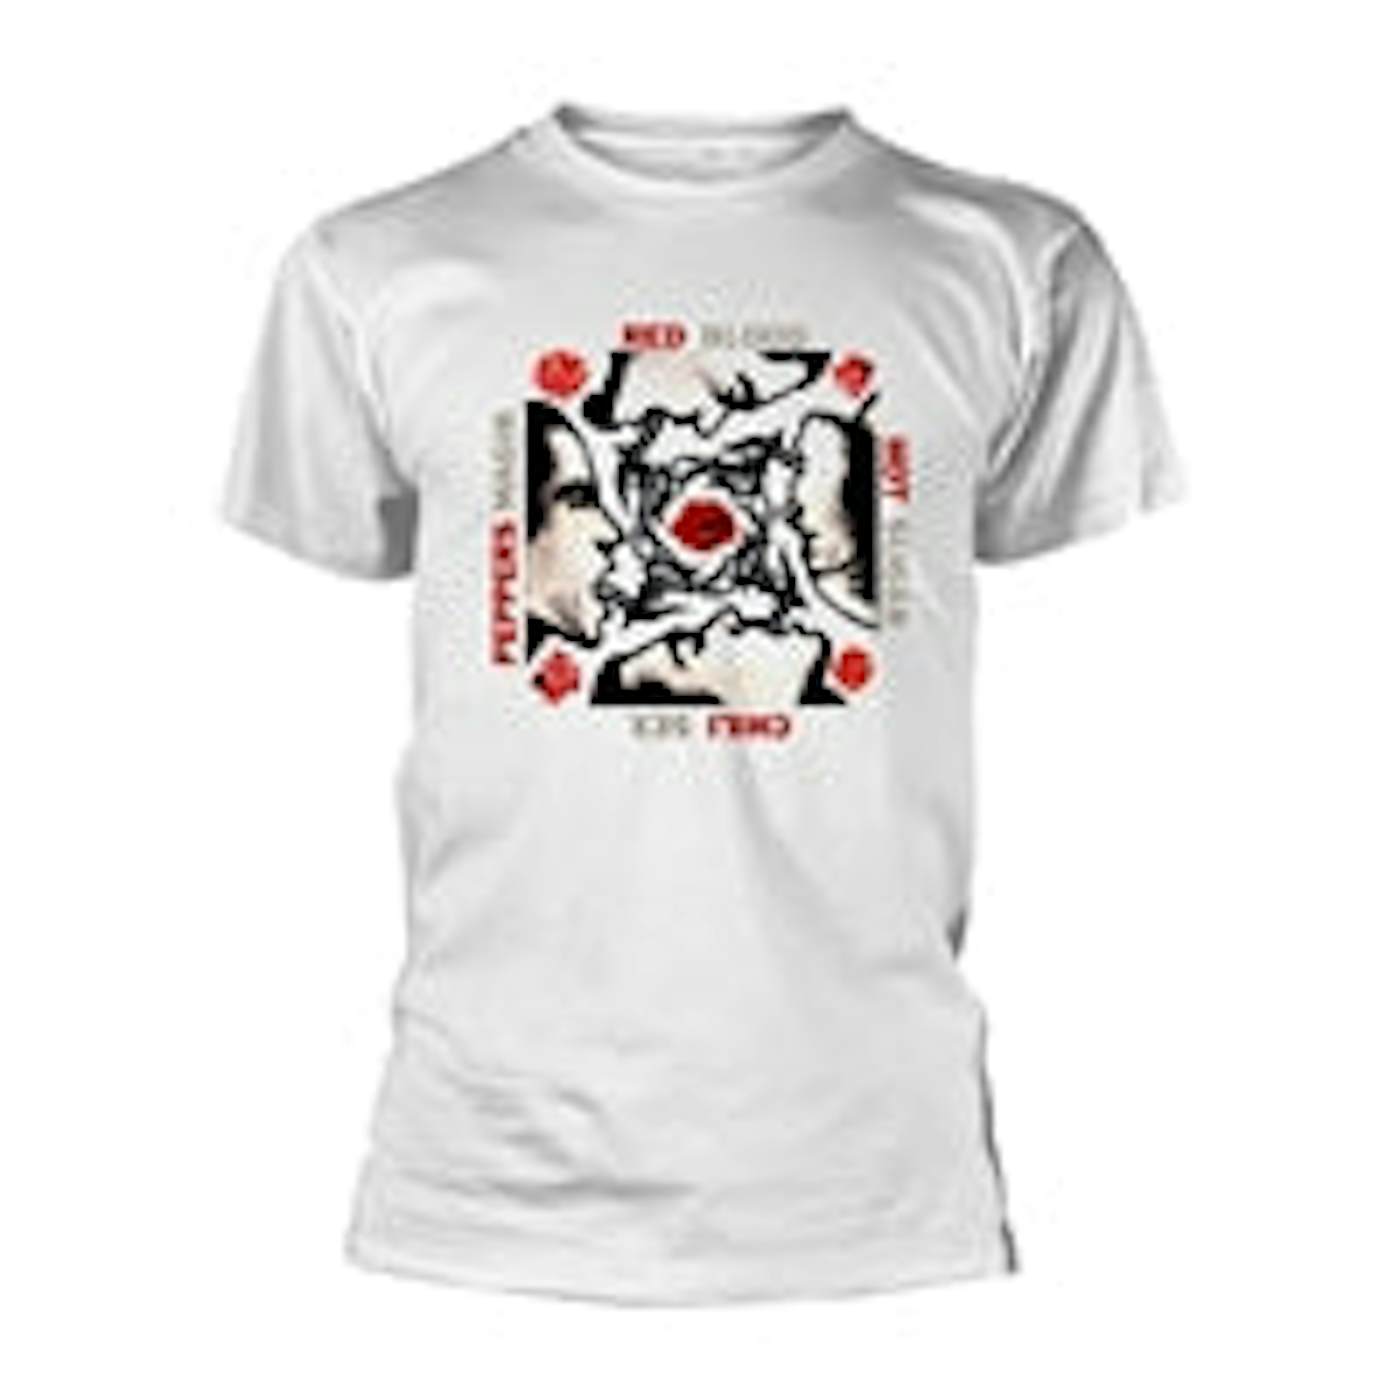 Red Hot Chili Peppers T Shirt - BSSM (White)